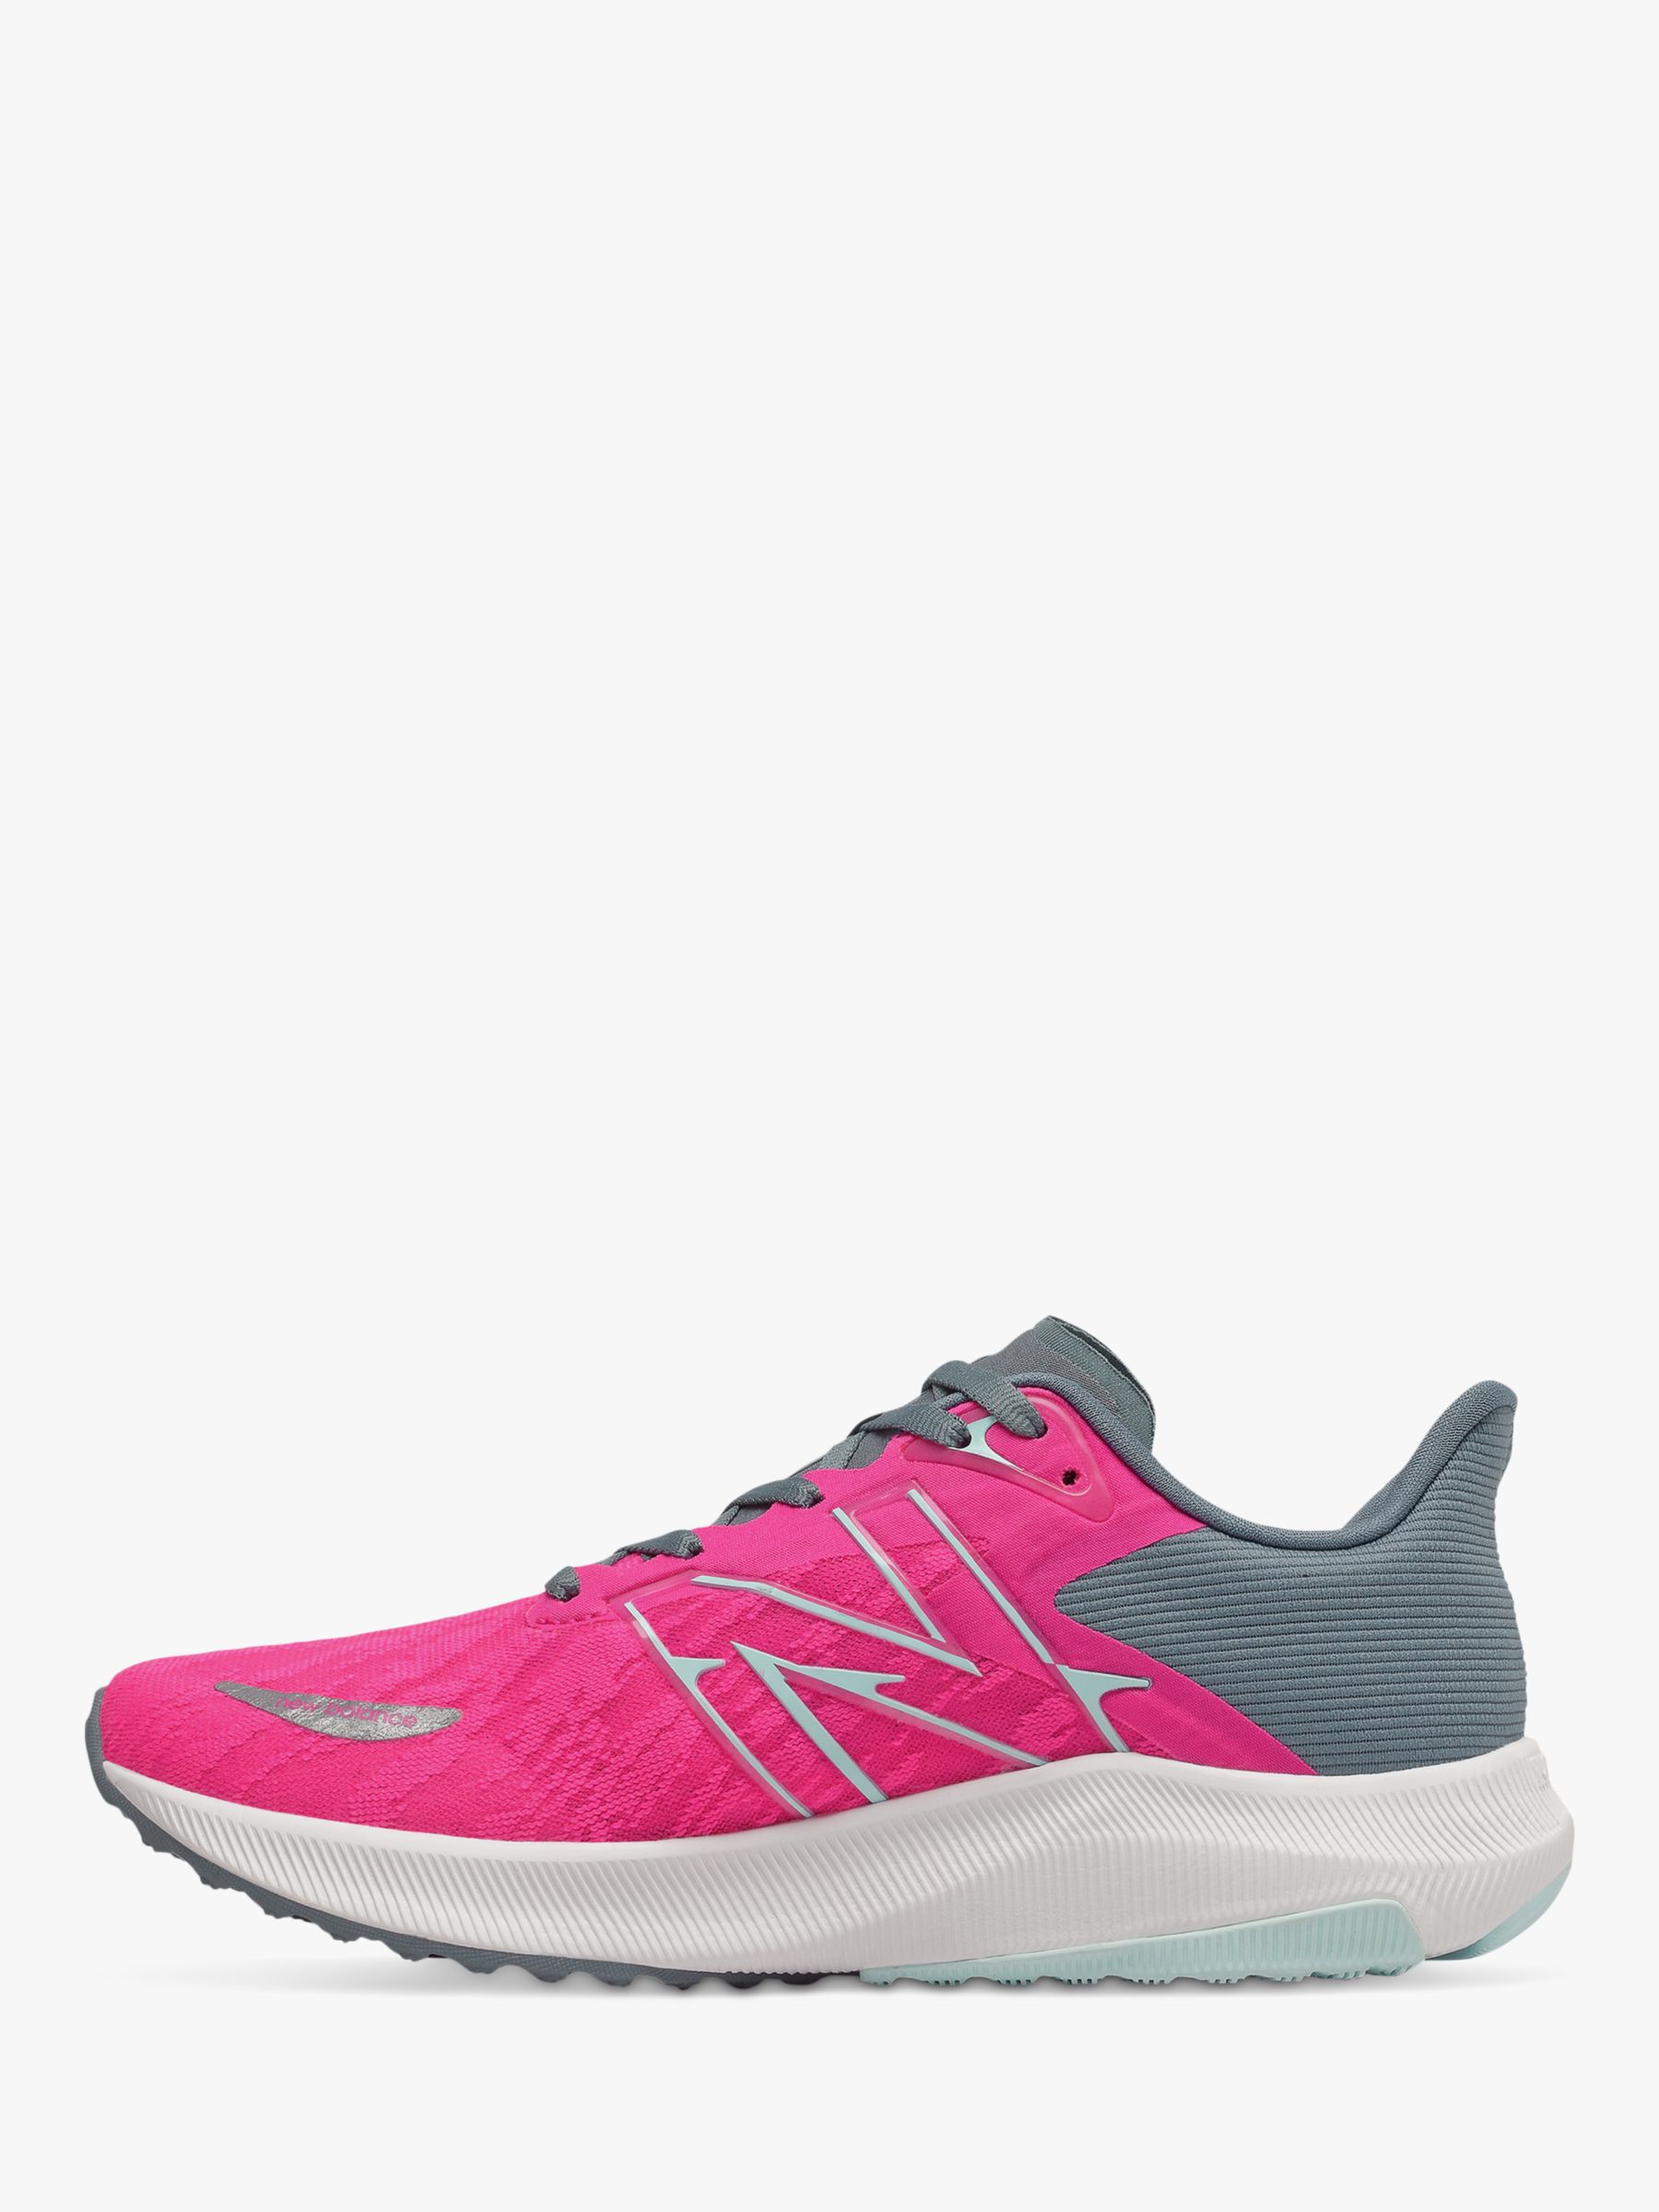 New Balance FuelCell Propel v3 Women's Running Shoes at John Lewis ...